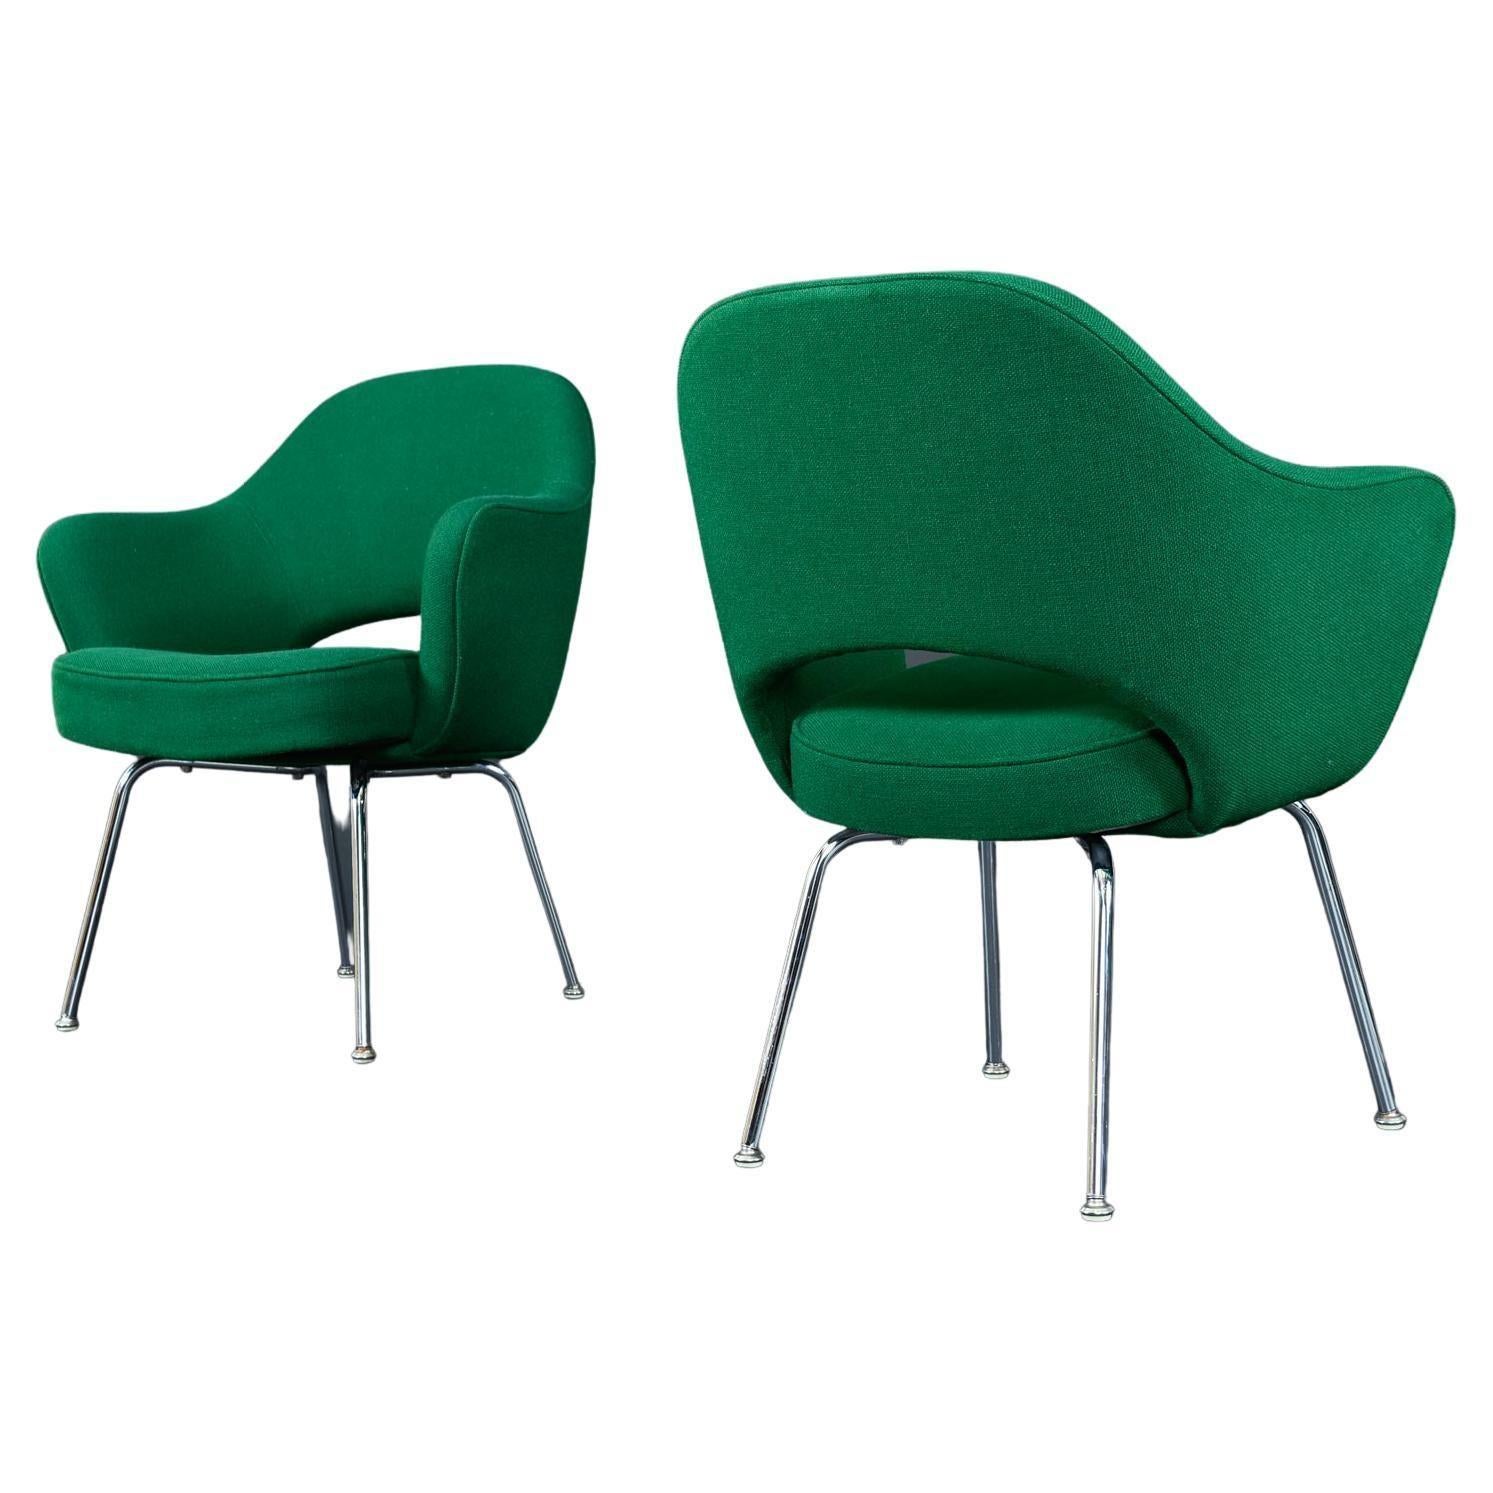 (4) Eero Saarinen for Knoll Executive armchairs in original emerald green fabric. It’s truly incredible to find a set of vintage upholstered chairs with such outstanding original fabric. The color has not faded, a green so brilliant as if they came